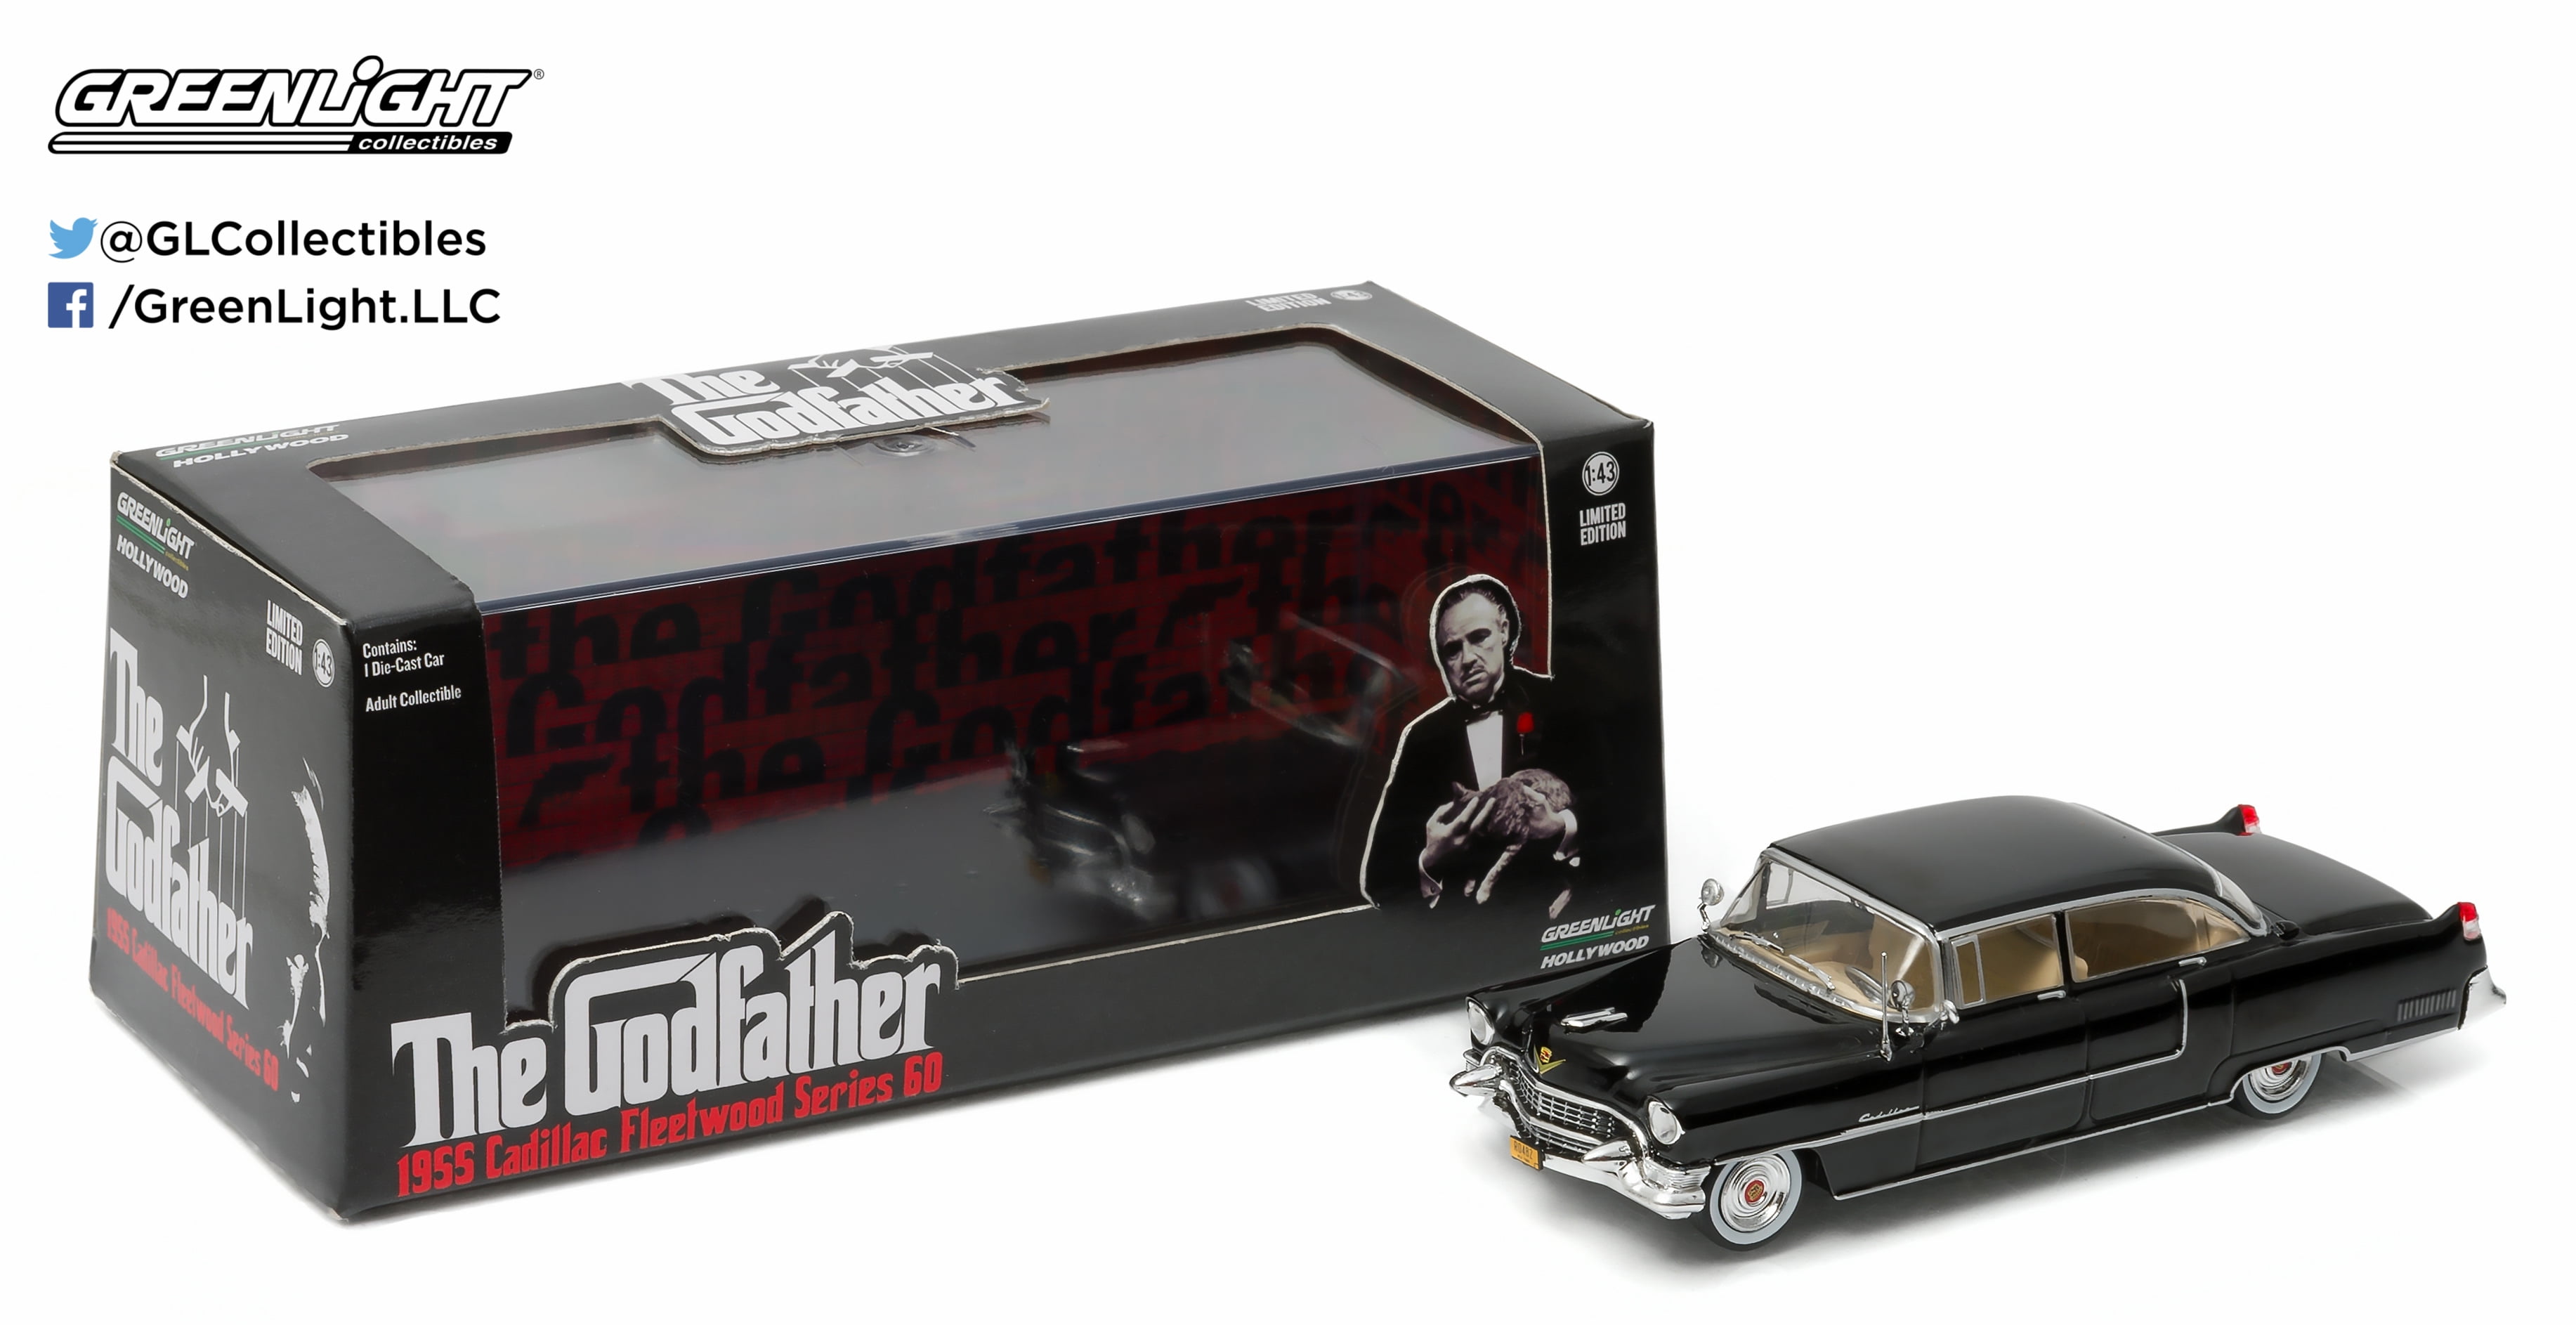 - 1955 Cadillac Fleetwood Series 60 Special 1:43 Scale Vehicle The Godfather Black Greenlight Hollywood 1972